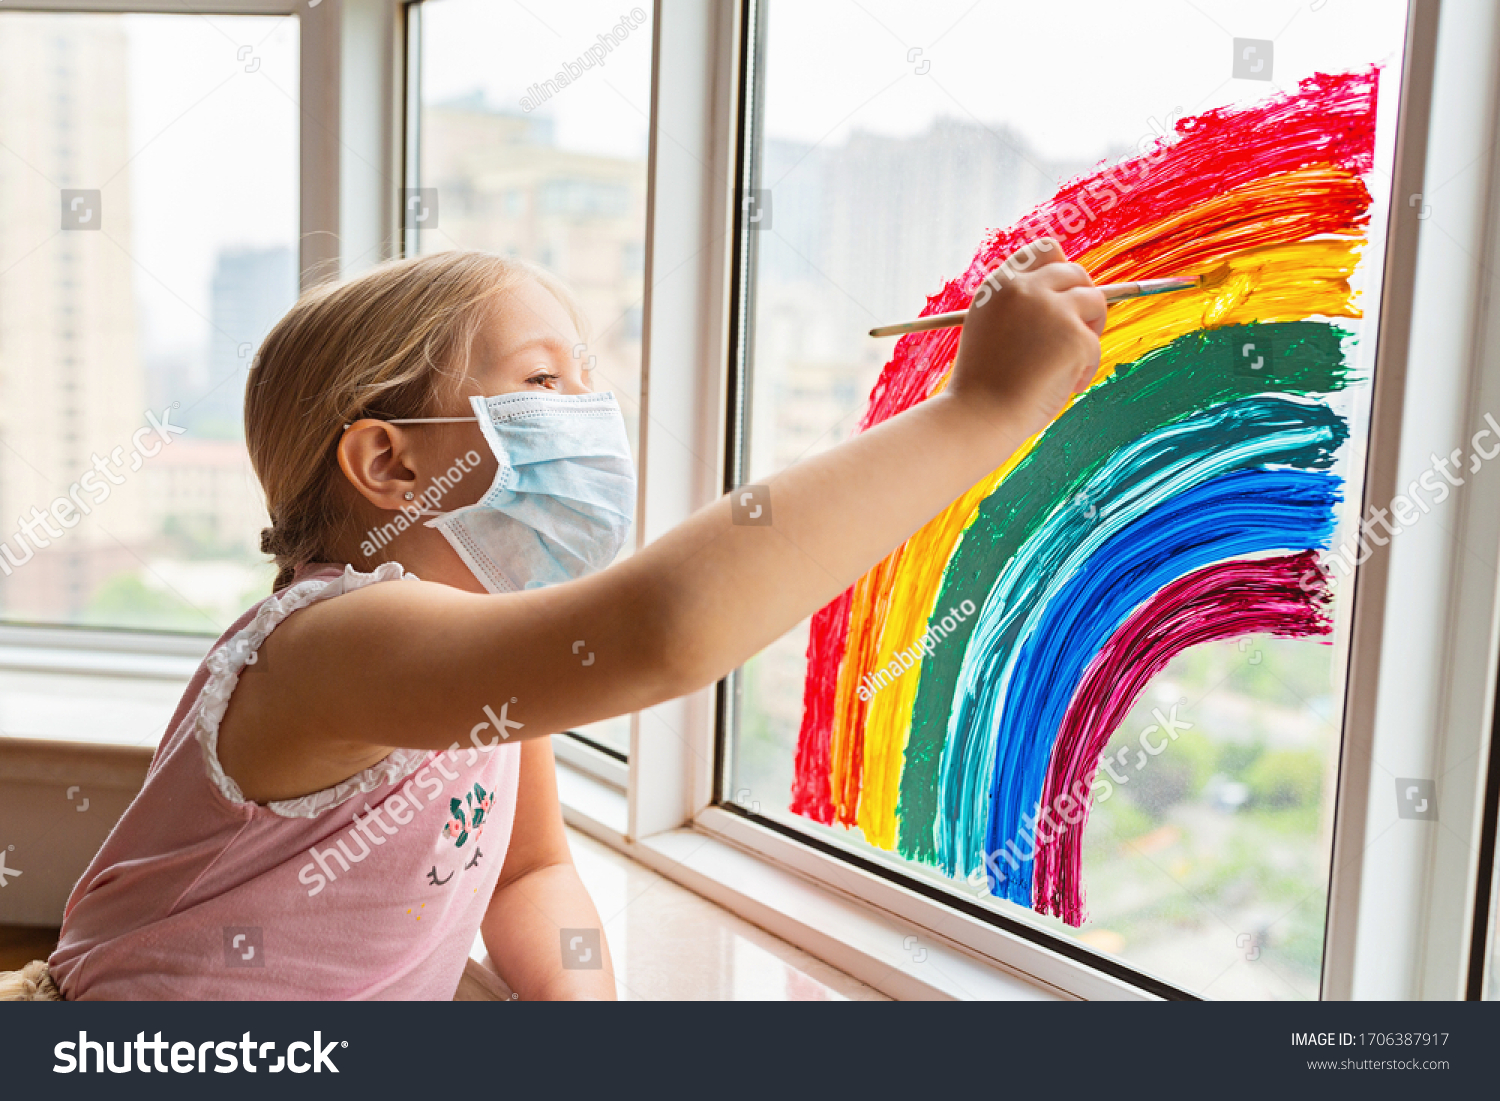 Kid painting rainbow during Covid-19 quarantine at home. Girl near window. Stay at home Social media campaign for coronavirus prevention, let's all be well, hope during coronavirus pandemic concept #1706387917